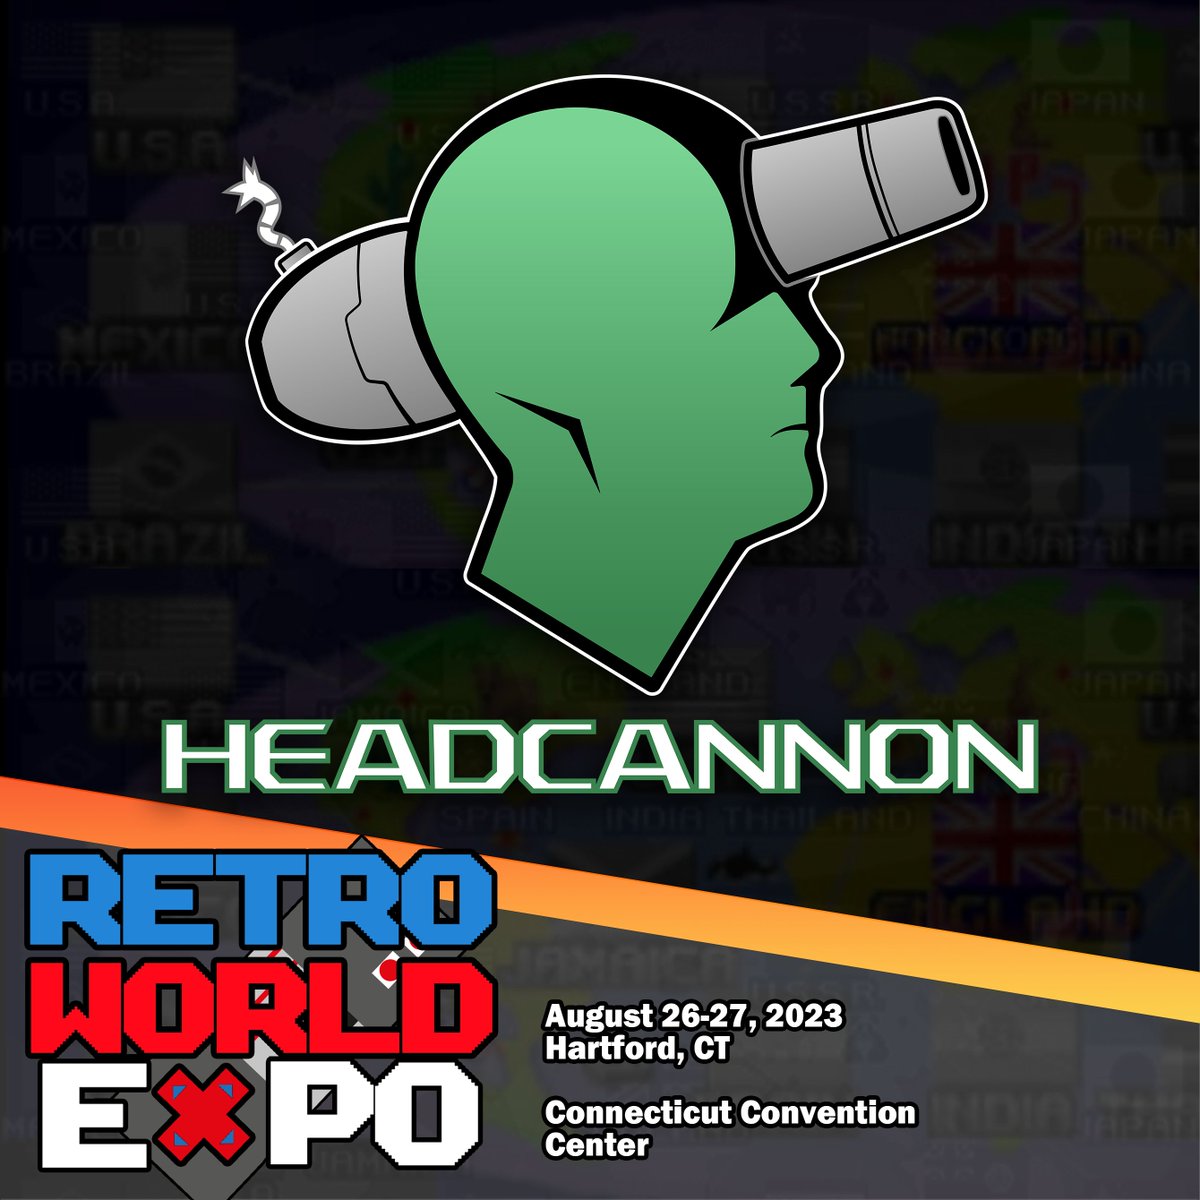 RWX is very excited to announce the Inde Game Developer @Head_cannon #RWX23! Headcannon is known for their work on the critically acclaimed Sonic Mania, and Sonic 1 & 2 Remastered. They will have a booth and host their own panel - check em out all wknd! RetroWorldExpo.com